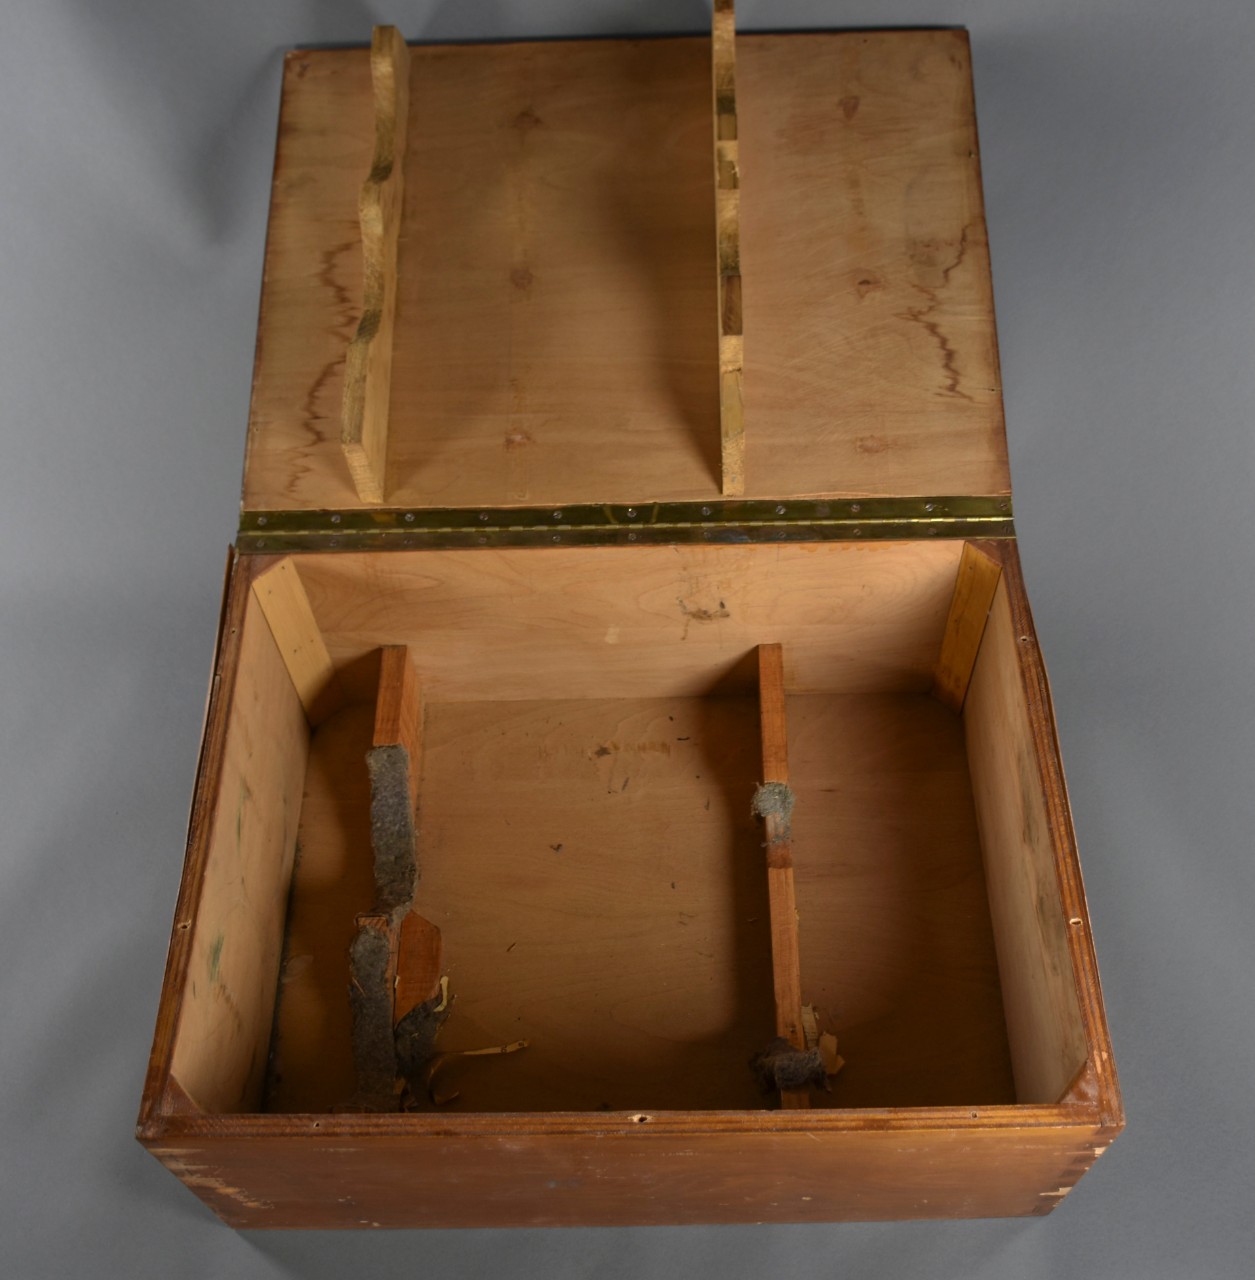 <p>Wooden case with open lid and custom mount for holding Big Eye Japanese Binoculars</p>
